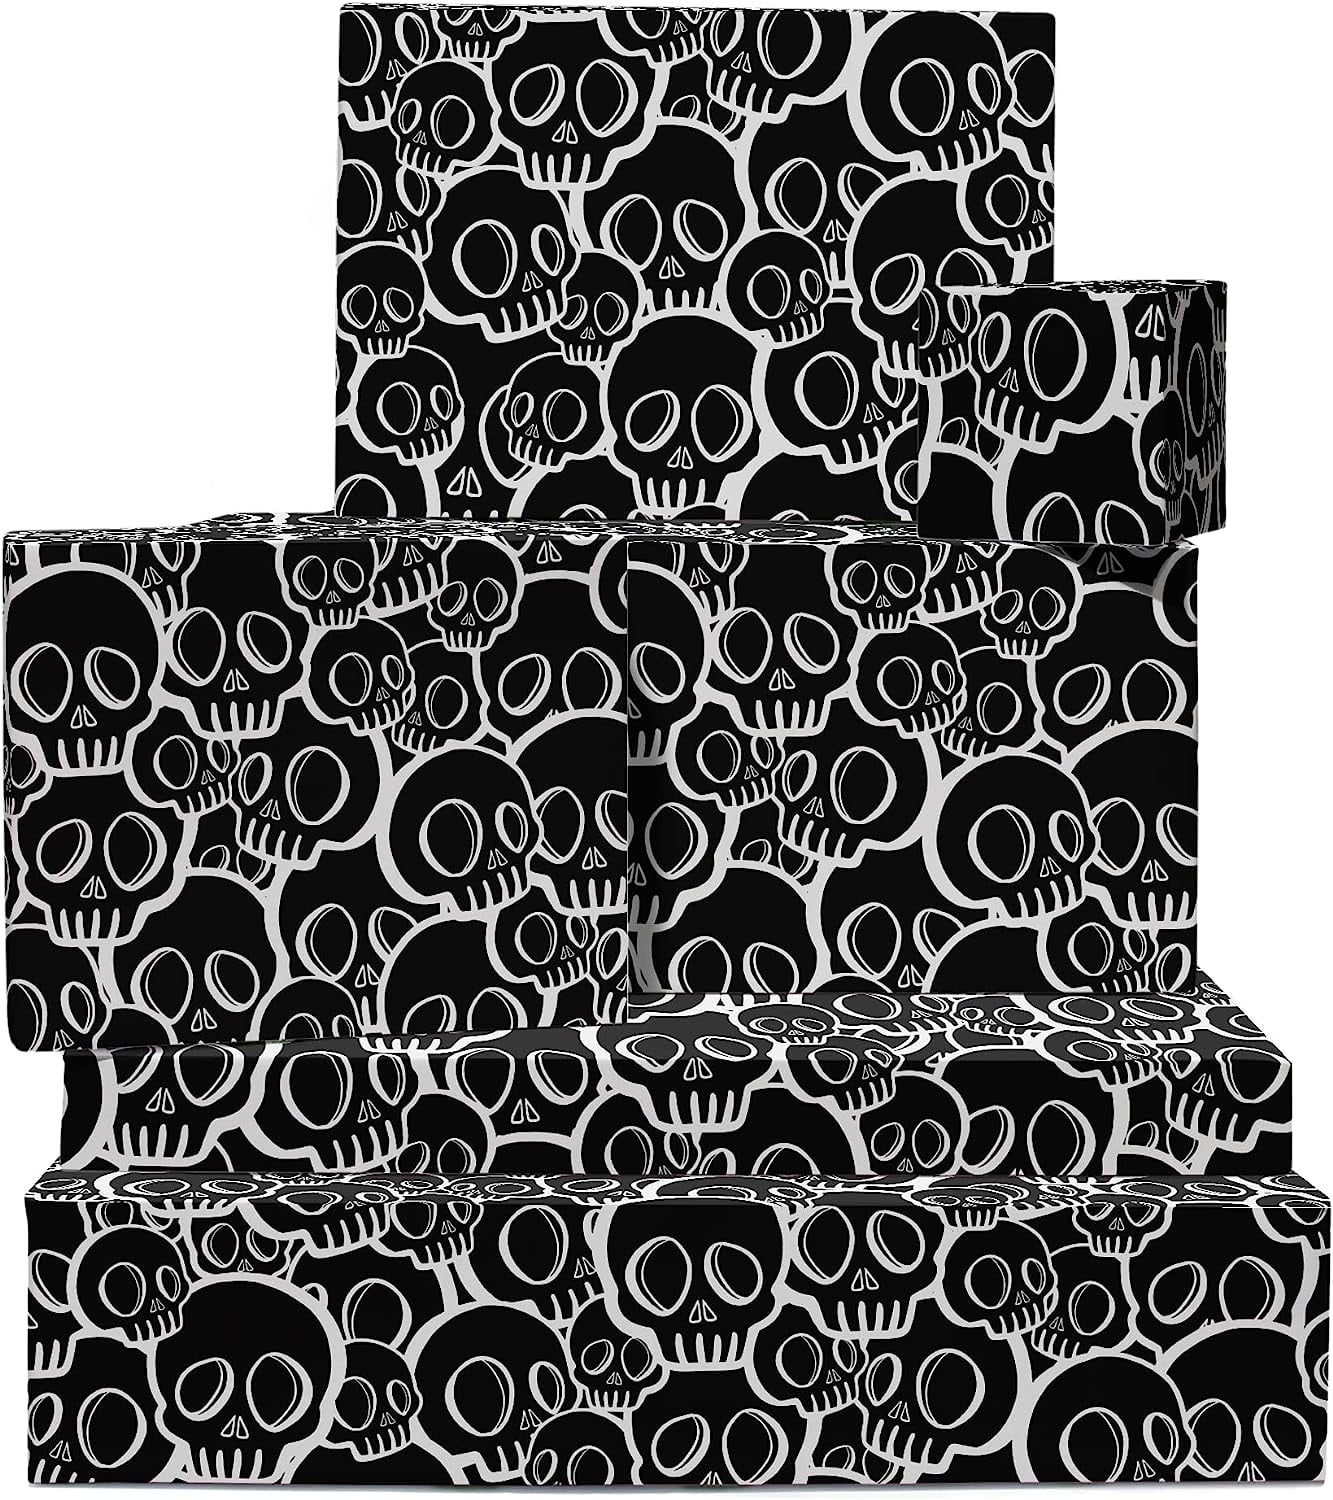 Black & White Gift Wrapping Papers - 6 sheets (9780804851169